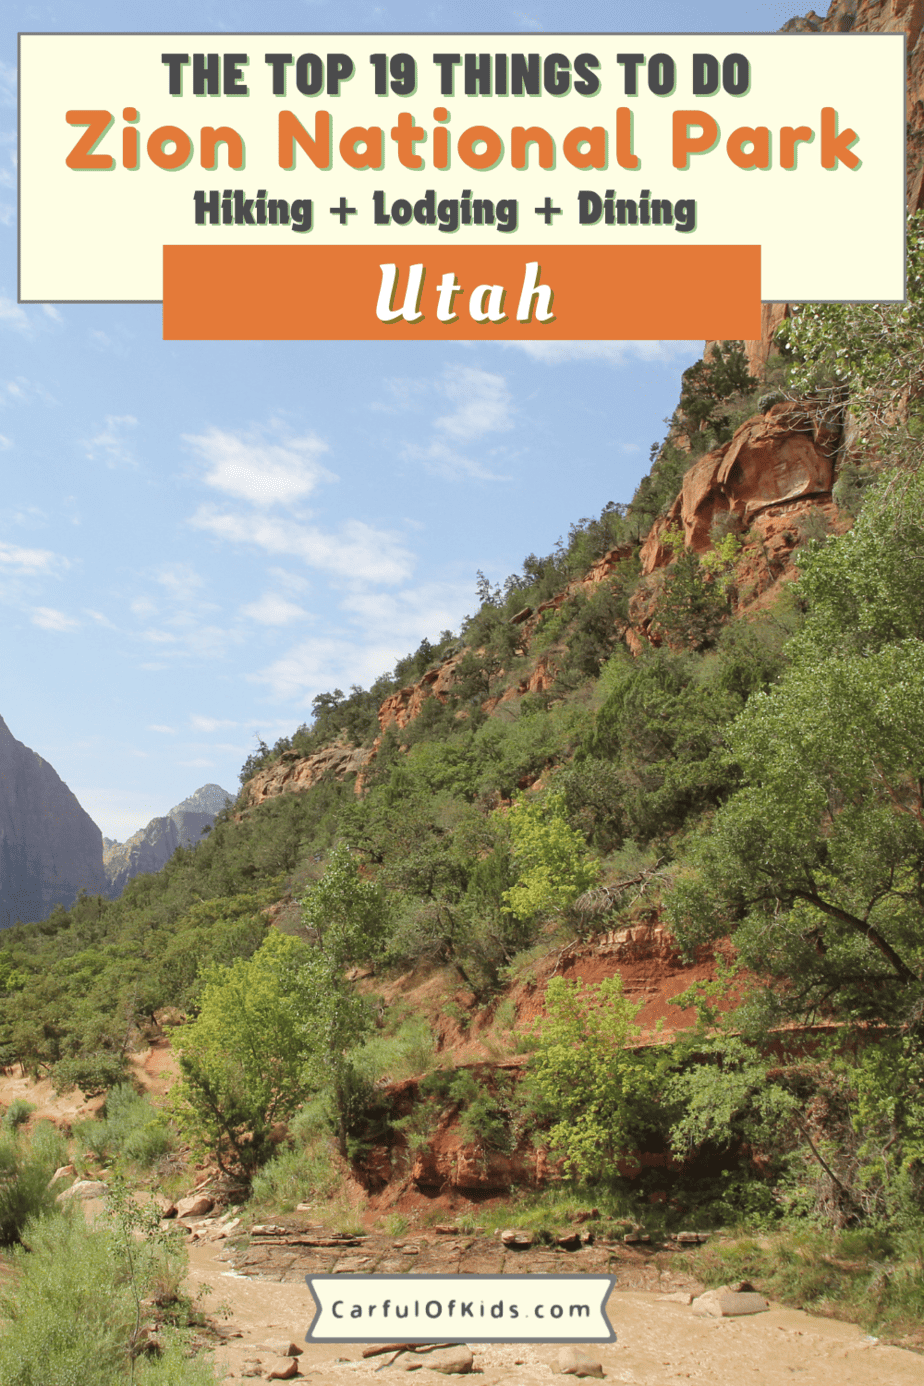 Located in Southern Utah, Zion National Park is a Top 10 National Park. Find hiking, horseback riding, scenic tours, along with Junior Ranger badges and ranger programs. Get all the details on what to do in Utah's Zion National Park. What to do in Zion National Park with kids | Where to Stay in Zion National Park | Camping in Zion National Park #NationalParks #Zion